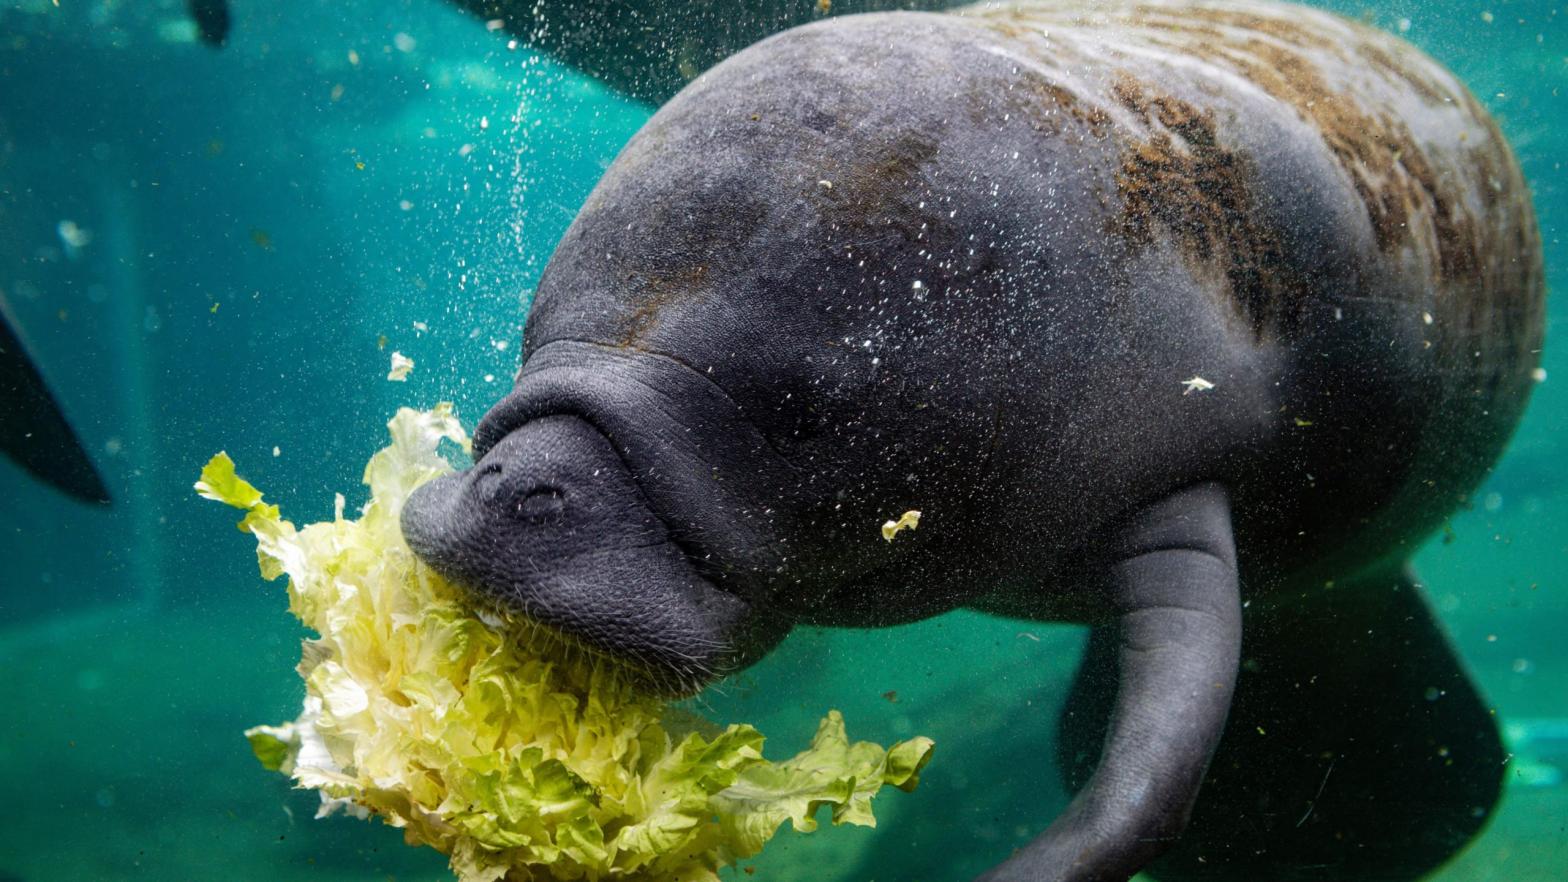 A manatee munches on lettuce in a Florida rehabilitation centre last month. (Photo: Eva Marie UZCATEGUI / AFP, Getty Images)